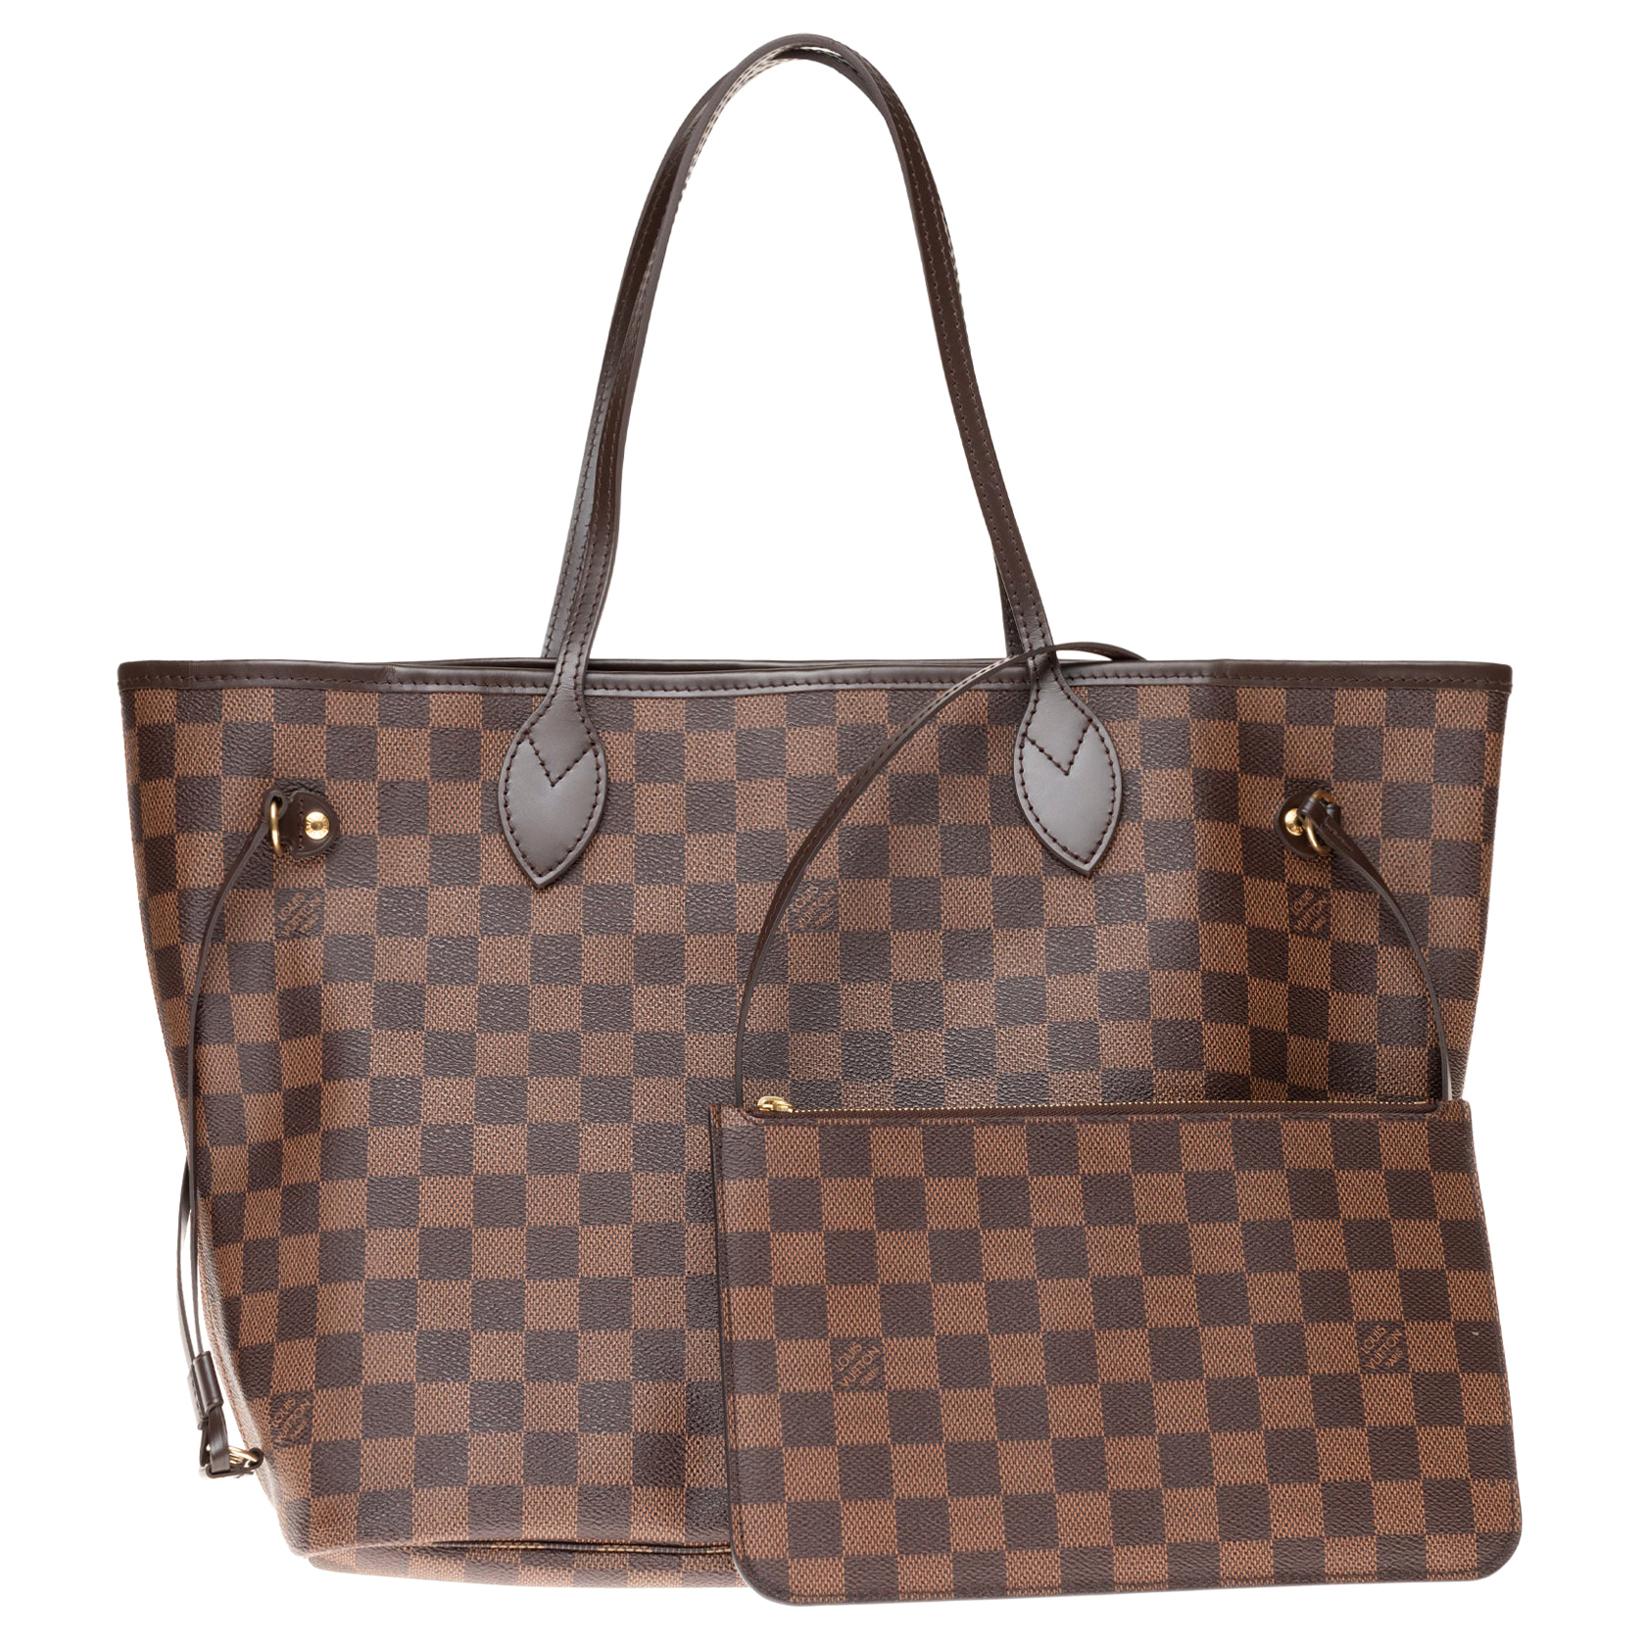 Louis Vuitton Neverfull MM Tote in brown damier canvas with pouch